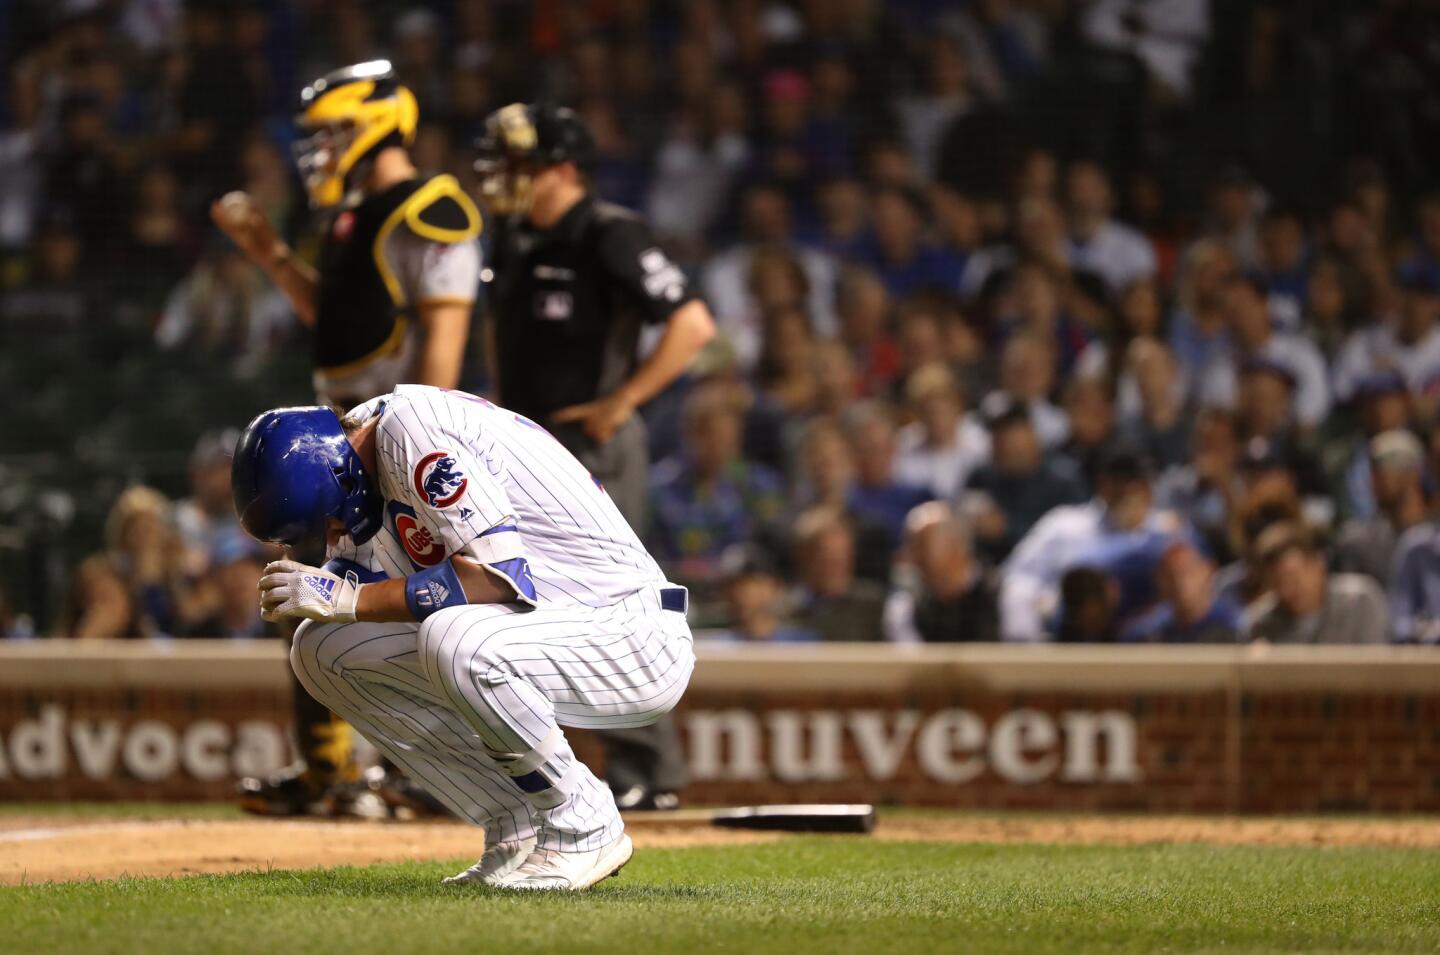 Cubs batter Kris Bryant reacts after being hit by a pitch in the fourth inning against the Pirates at Wrigley Field on Sept. 25, 2018.